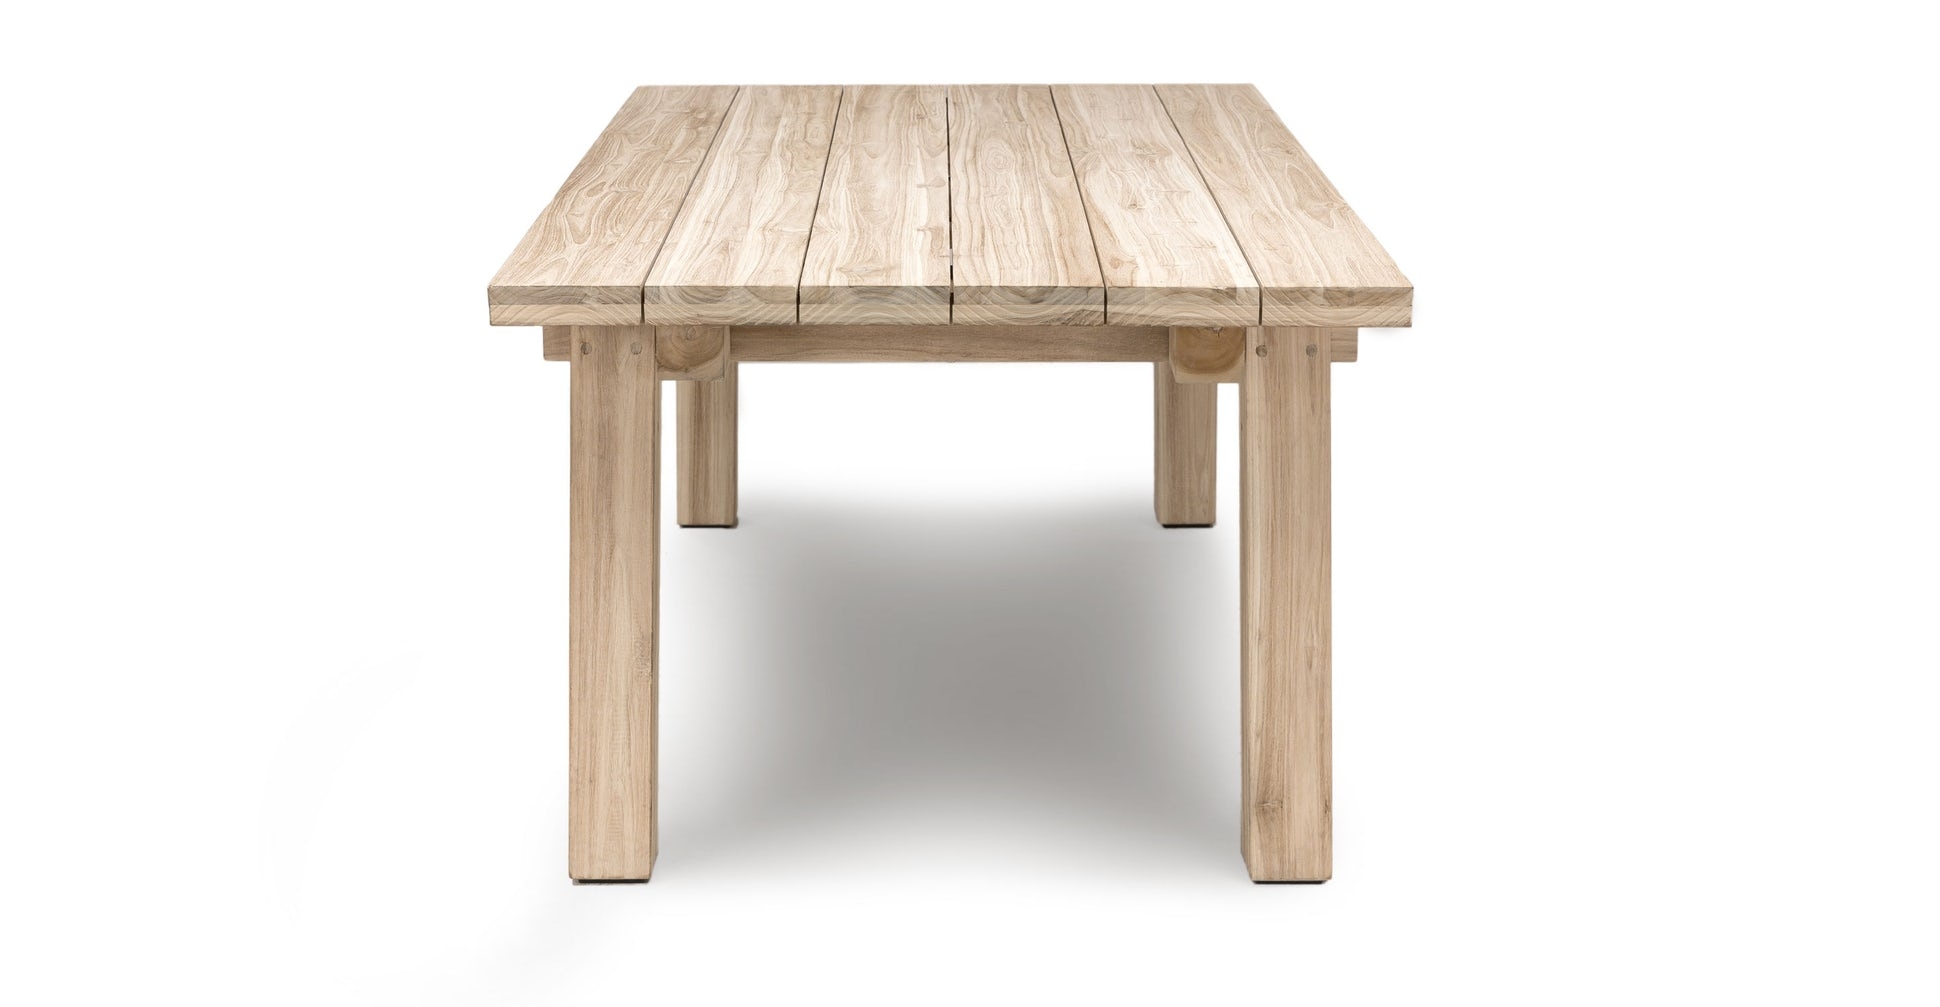 Teaka Dining Table For 8 - Image 2